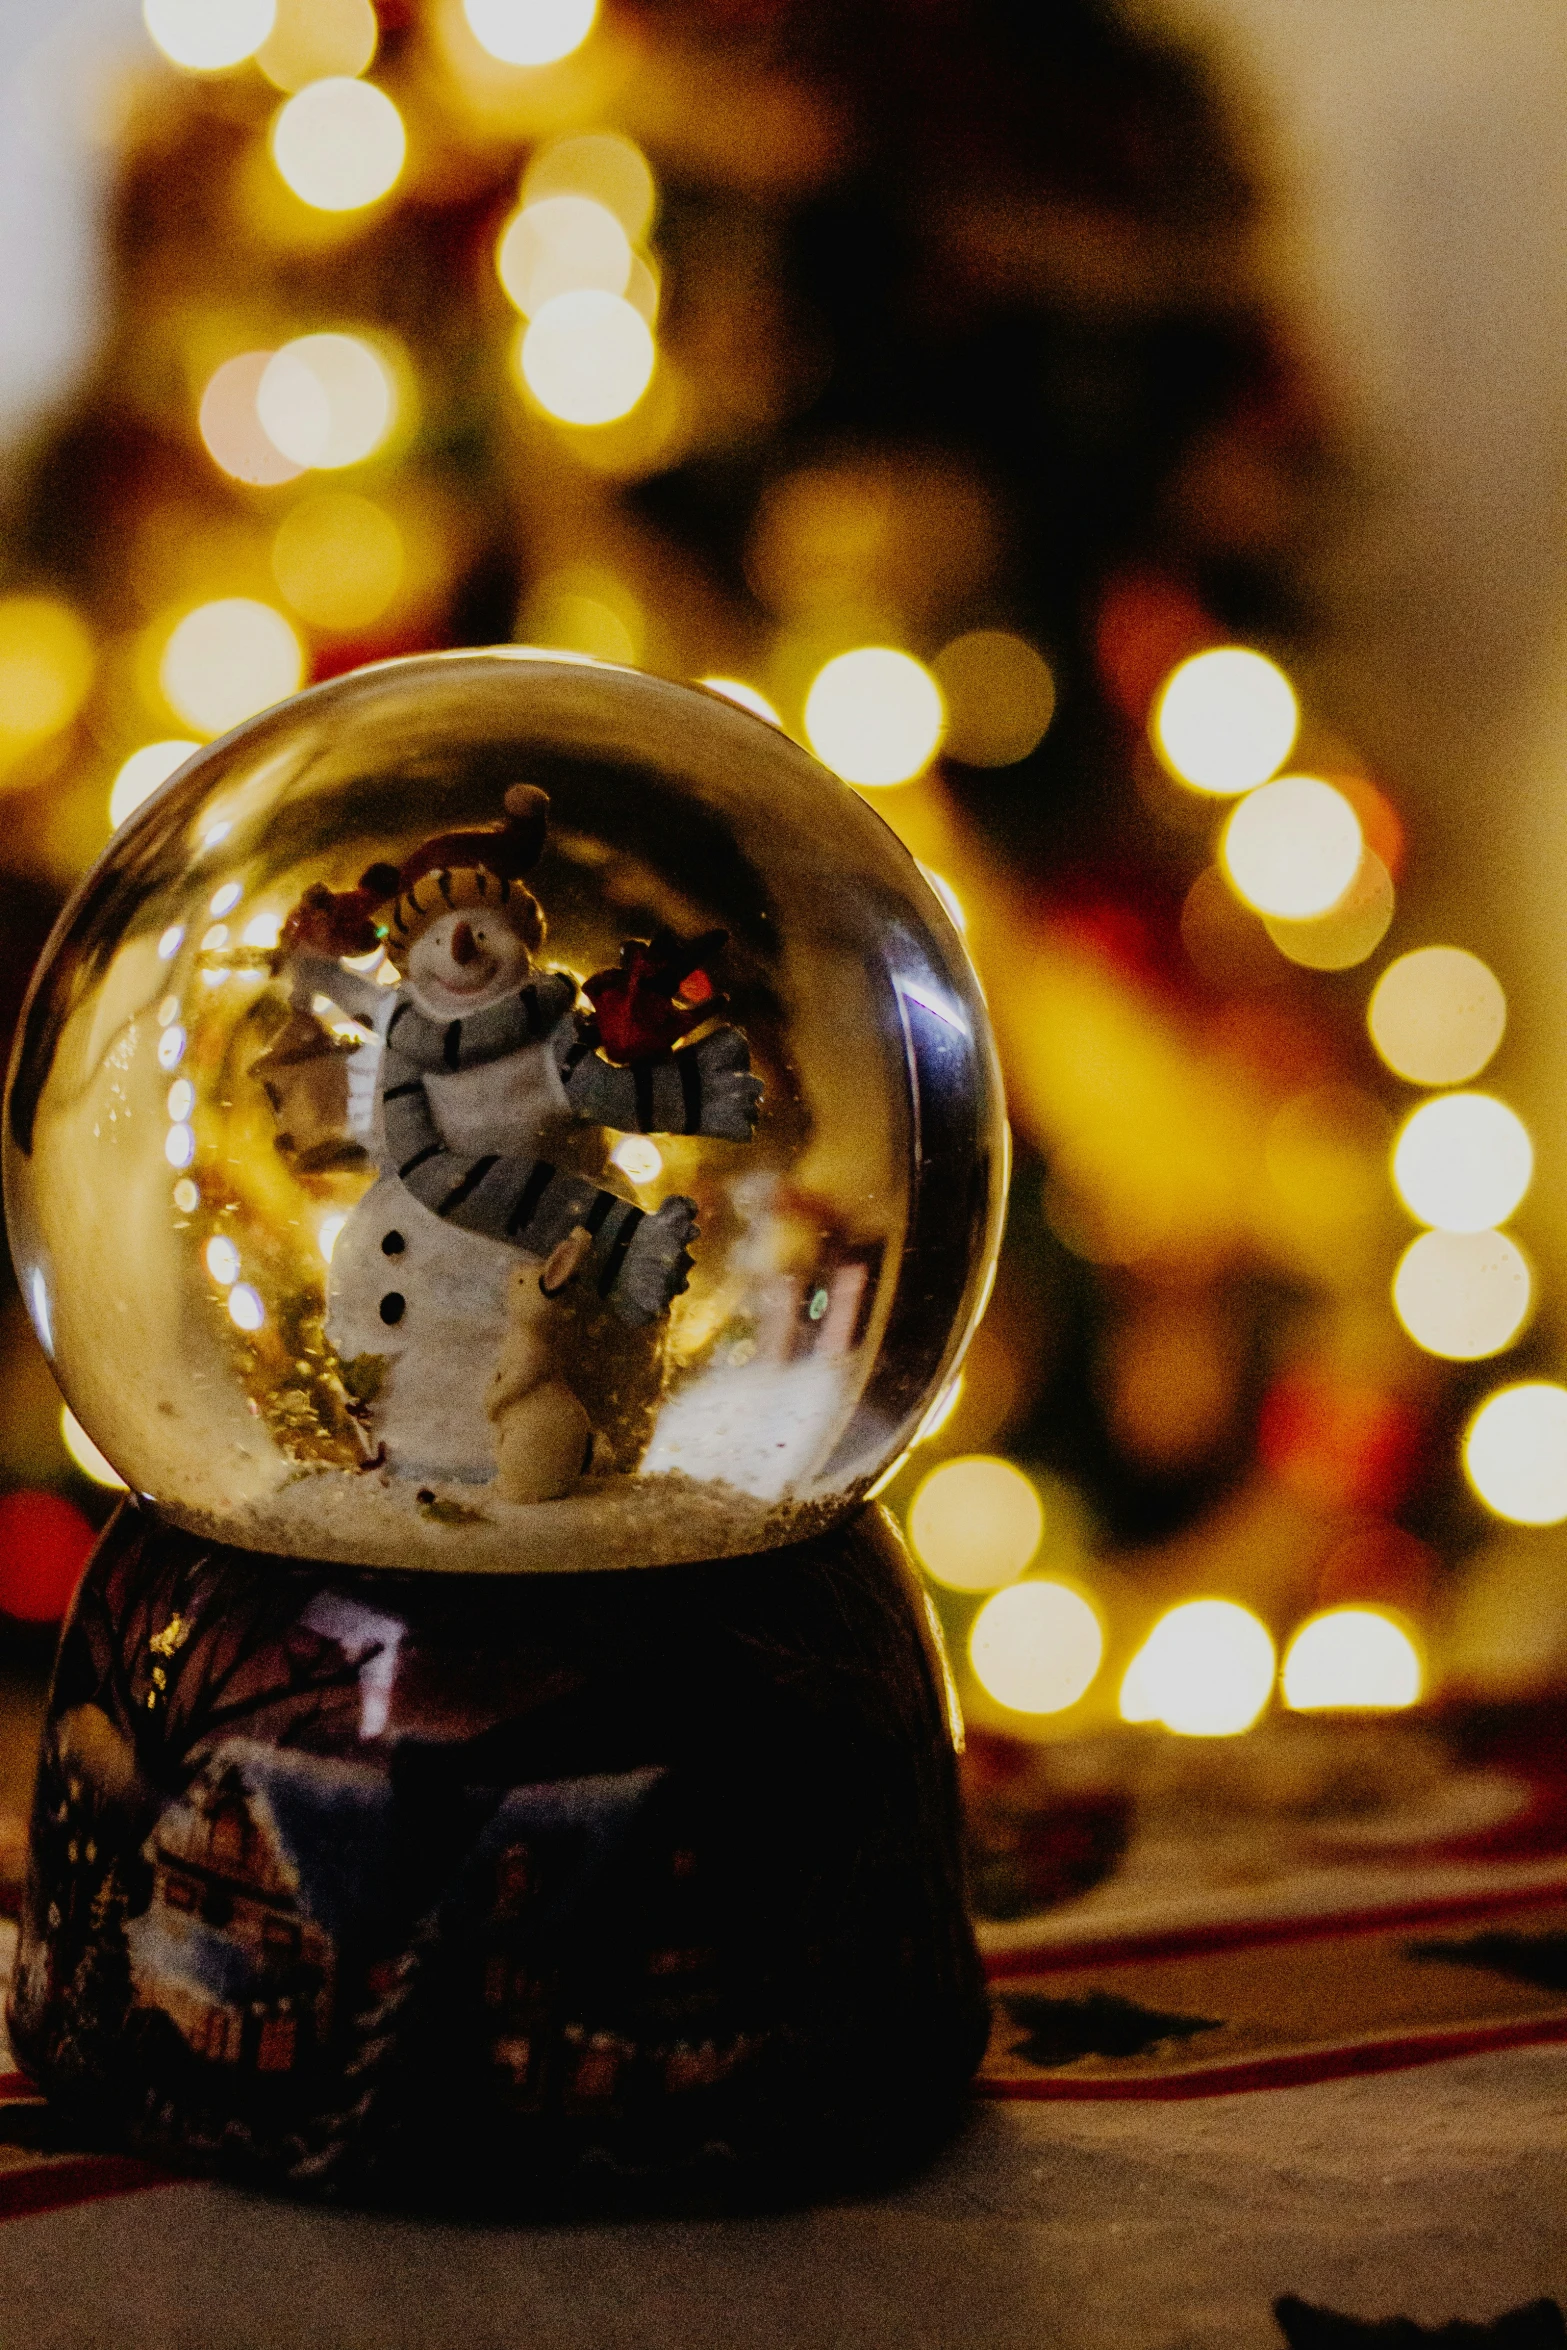 a snowman is sitting in the center of a glass ball